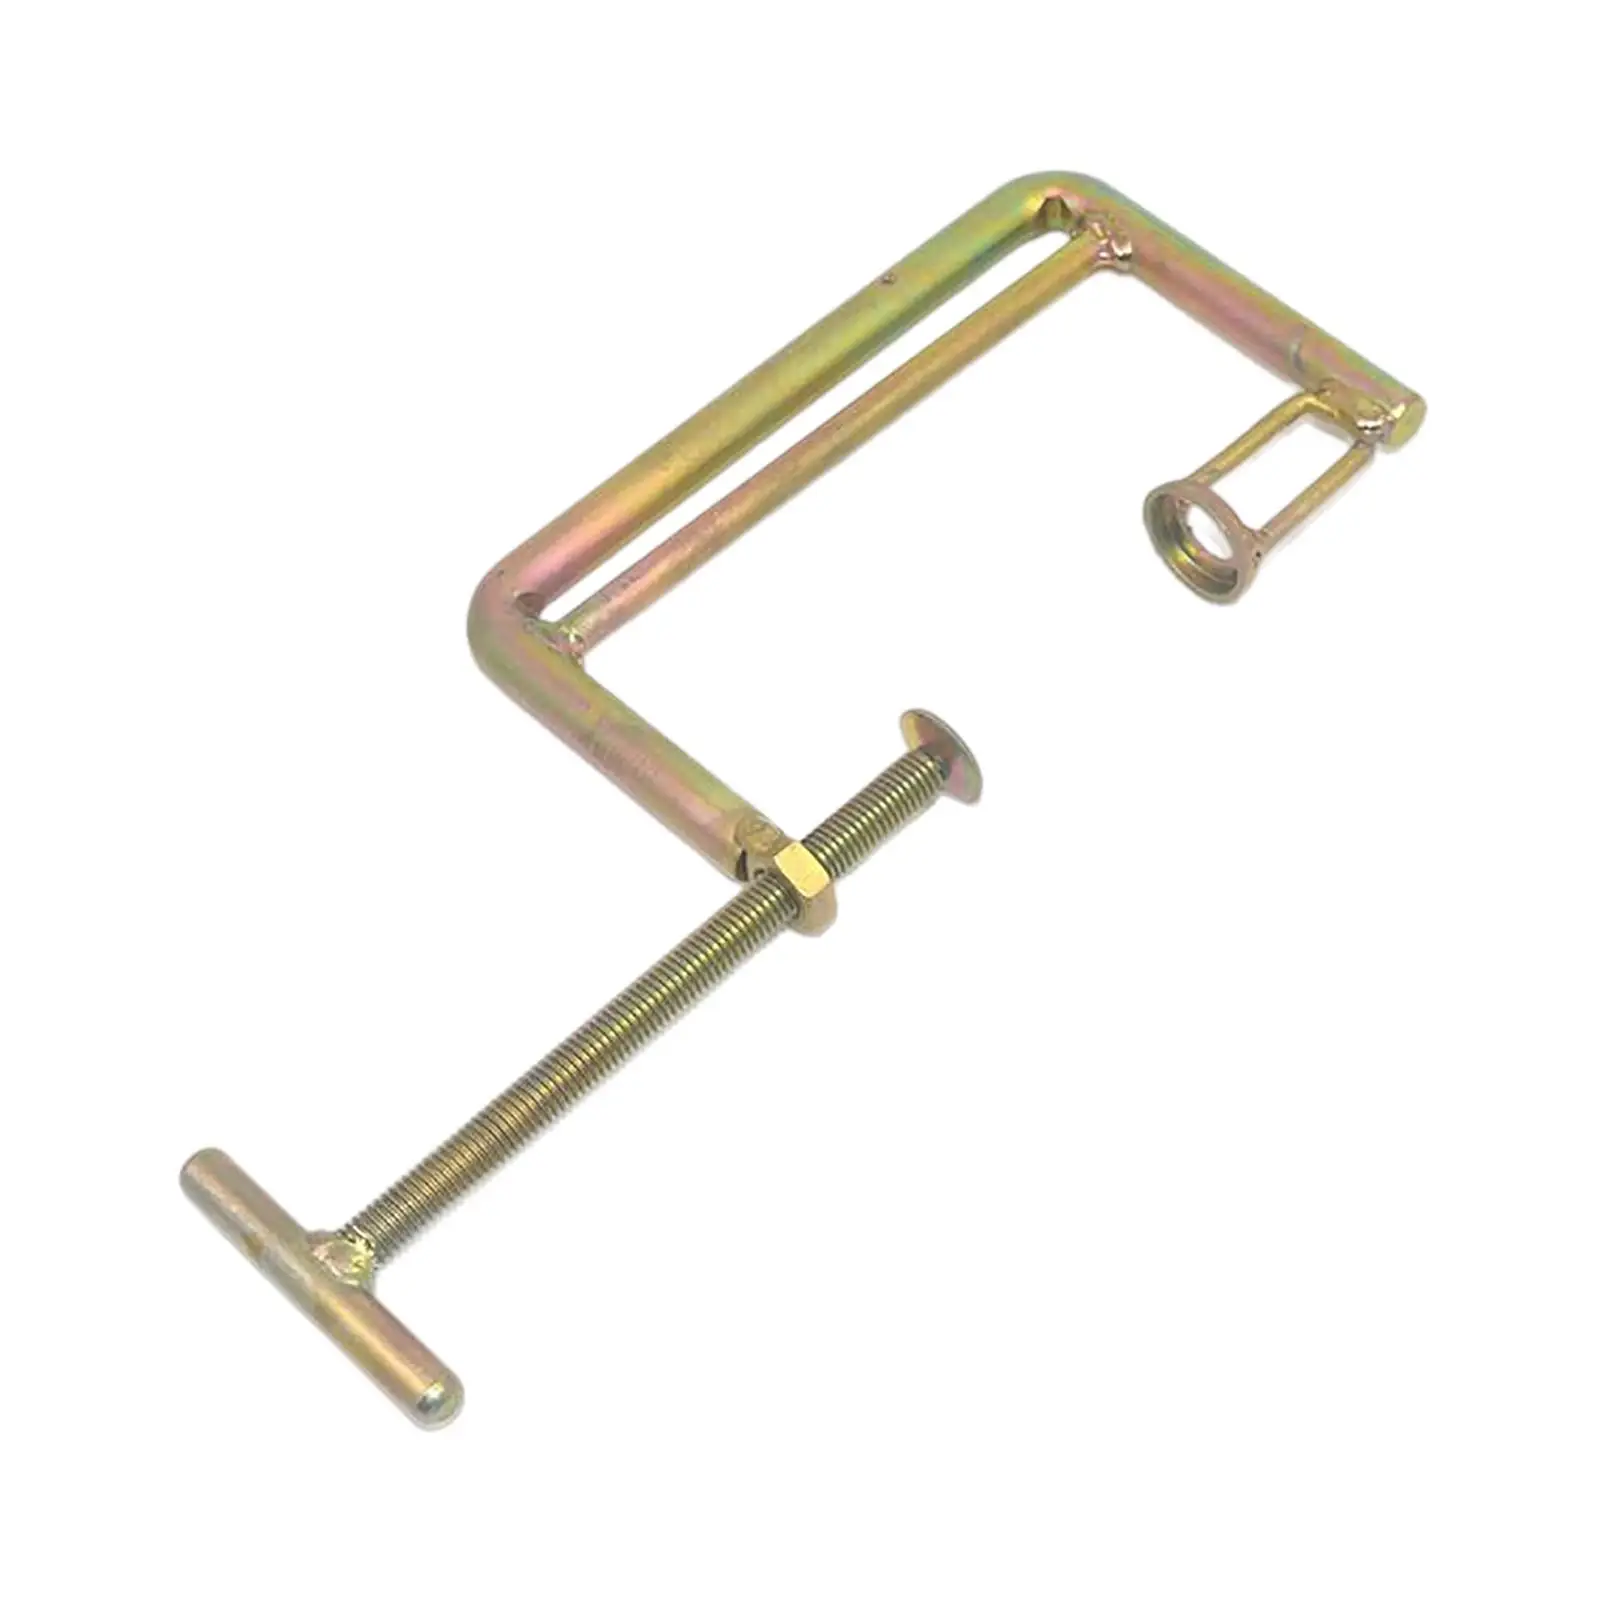 Valve Spring Clamps Repair Tool Reliable for Small Engines Engine Parts